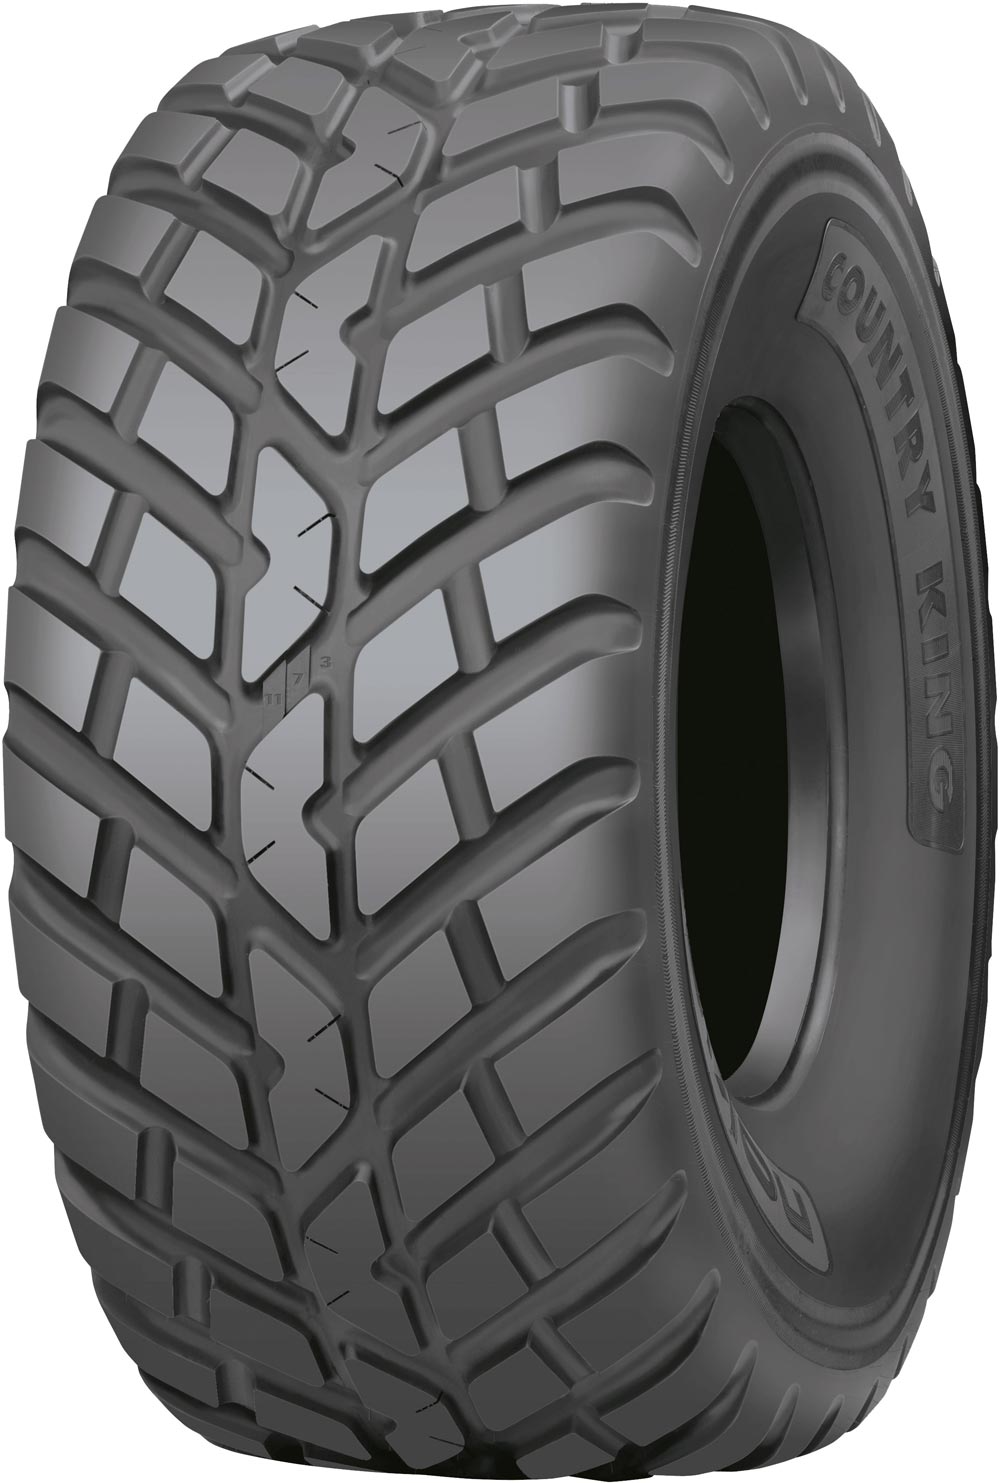 product_type-industrial_tires NOKIAN COUNTRY KING TL 710/50 R26.5 170D